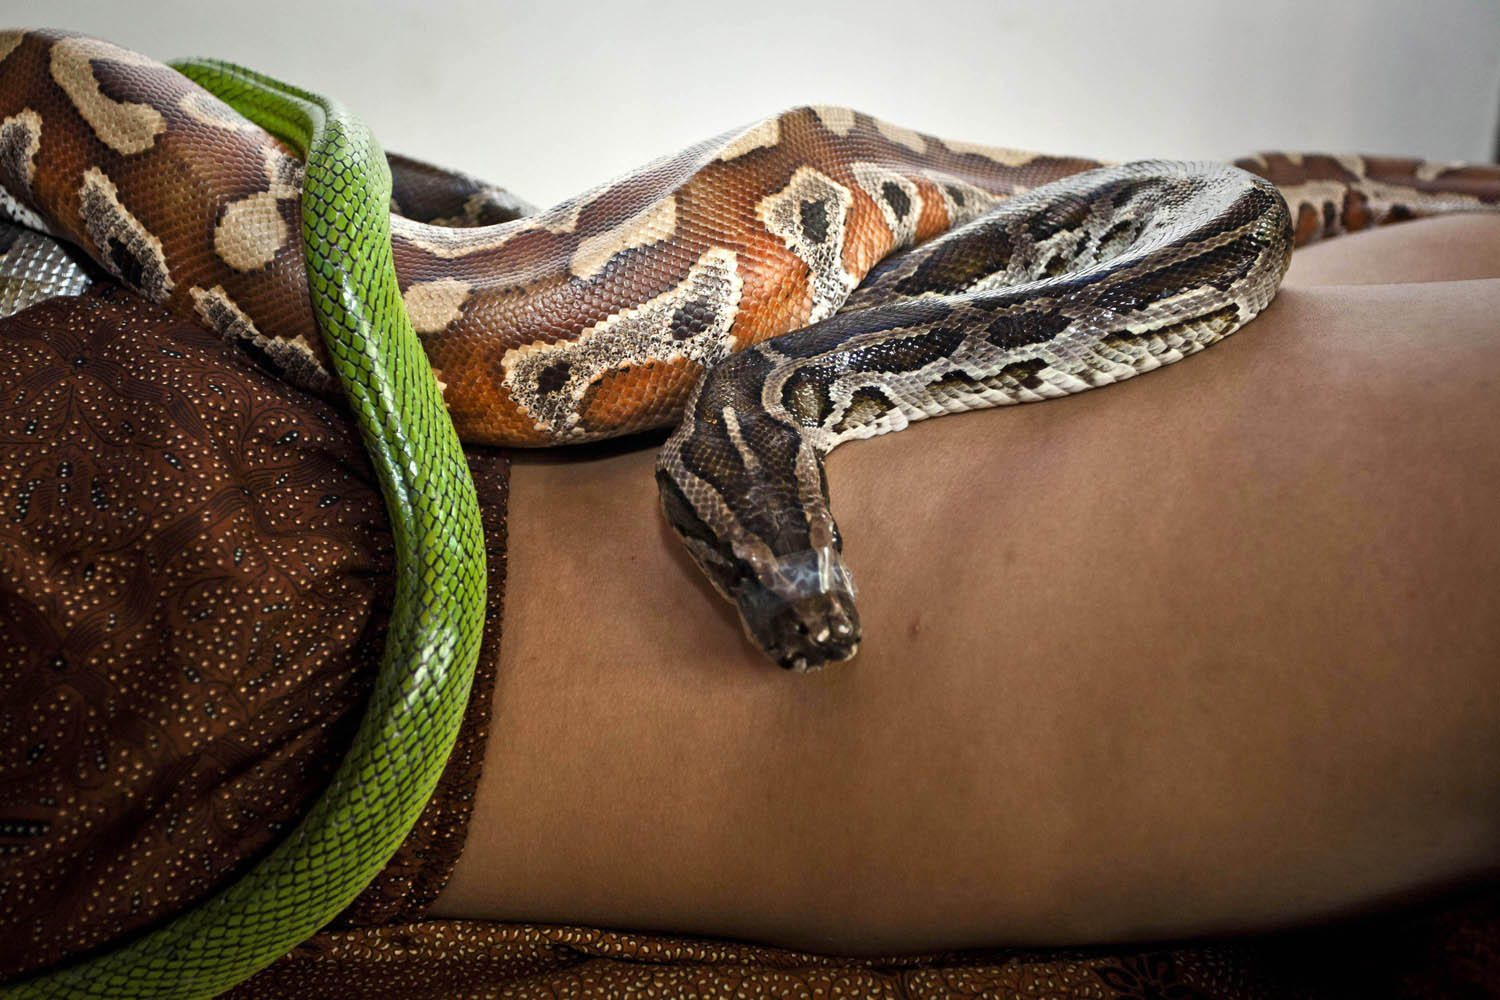 Oct. 27, 2013. A member of staff demonstrates a massage using pythons at Bali Heritage Reflexology and Spa in Jakarta, Indonesia.